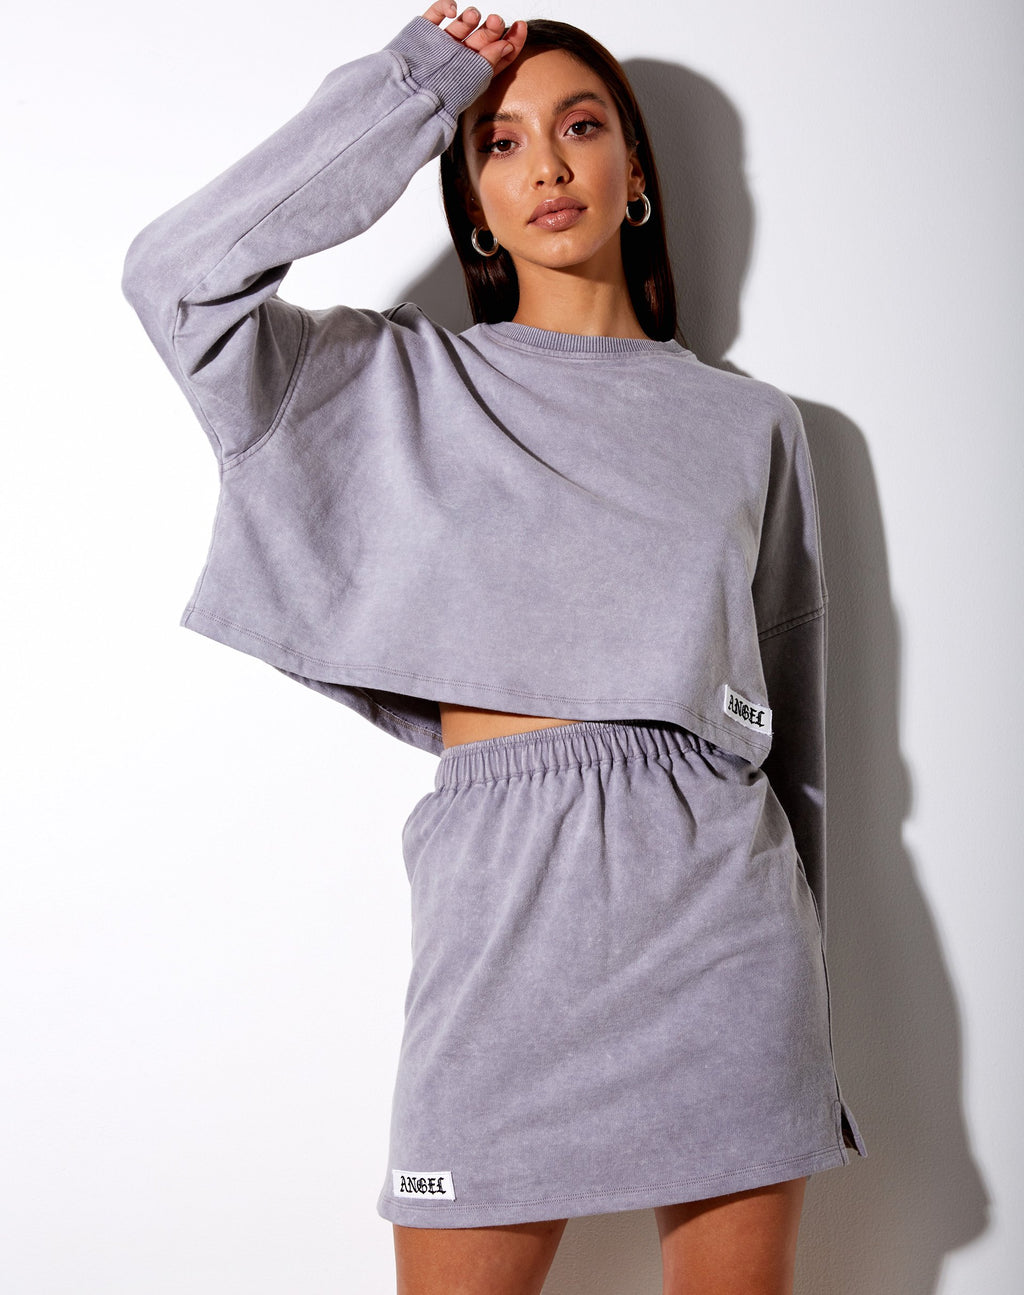 Fawly Crop Top in Grey Wash "Angel" Embro Label